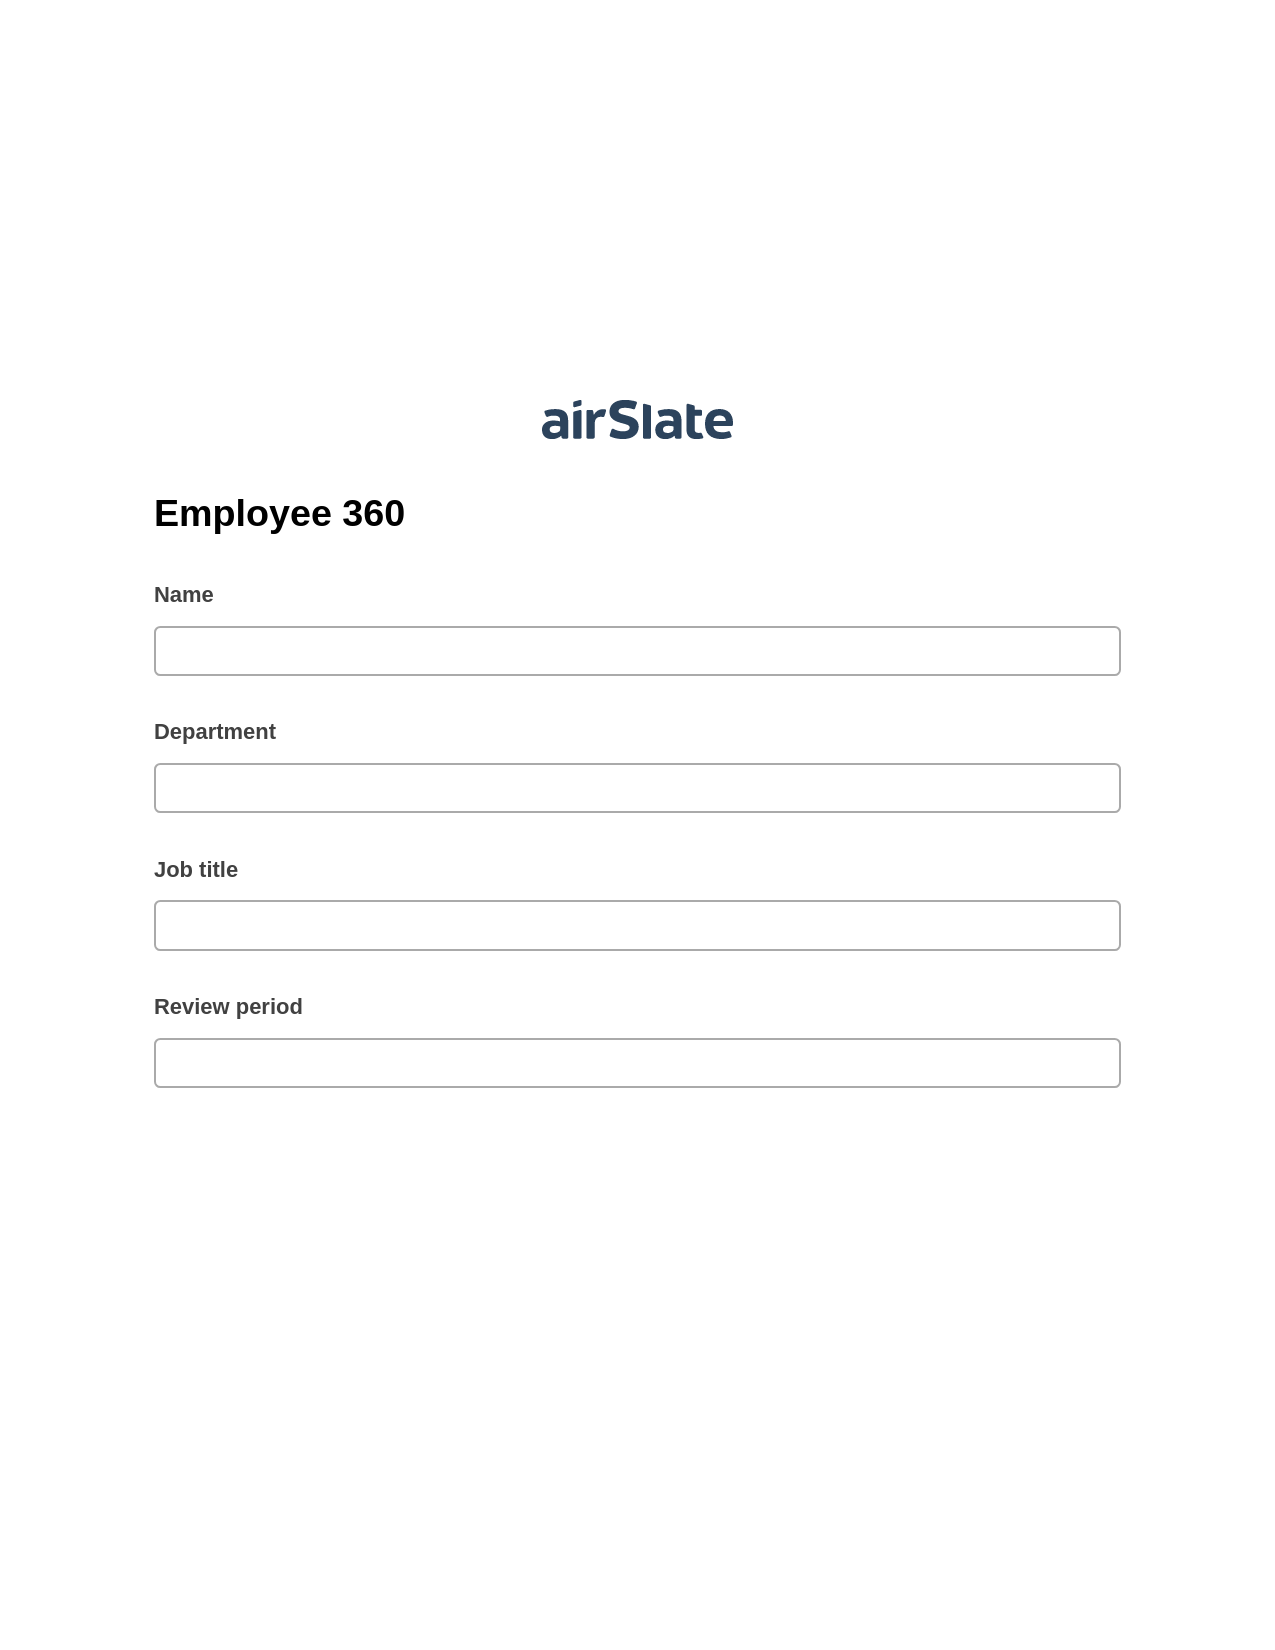 Multirole Employee 360 Pre-fill from Salesforce Records with SOQL Bot, Update MS Dynamics 365 Record Bot, Export to MySQL Bot